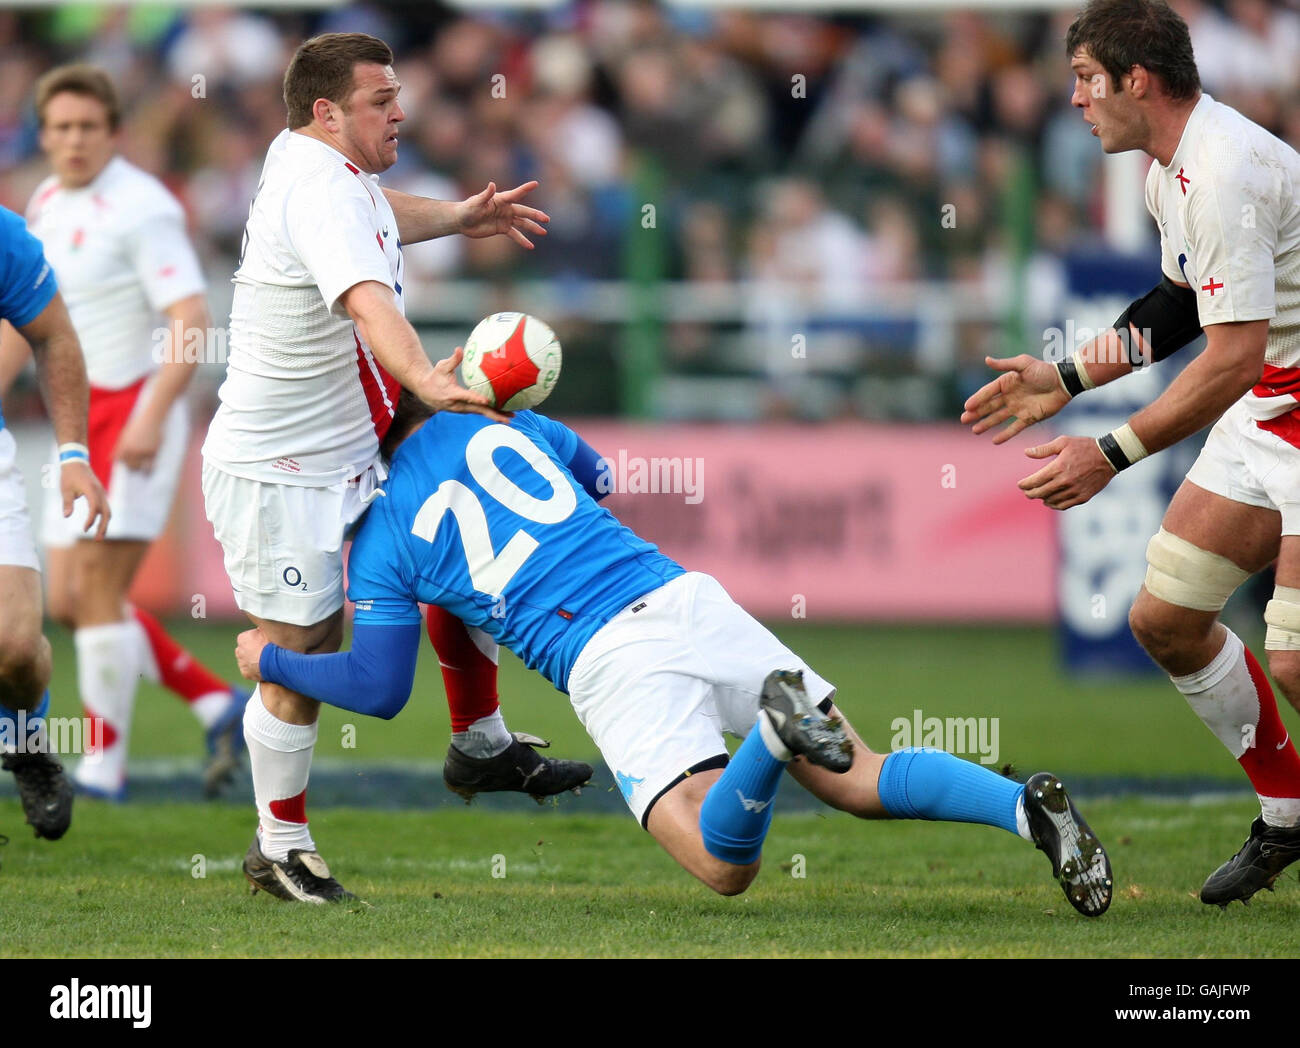 Rugby Union - RBS 6 Nations Championship 2008 - Italy v England - Stadio Flaminio. England's Lee Mears off loads his pass as he is tackled during the RBS 6 Nations match at Stadio Flaminio, Rome, Italy. Stock Photo